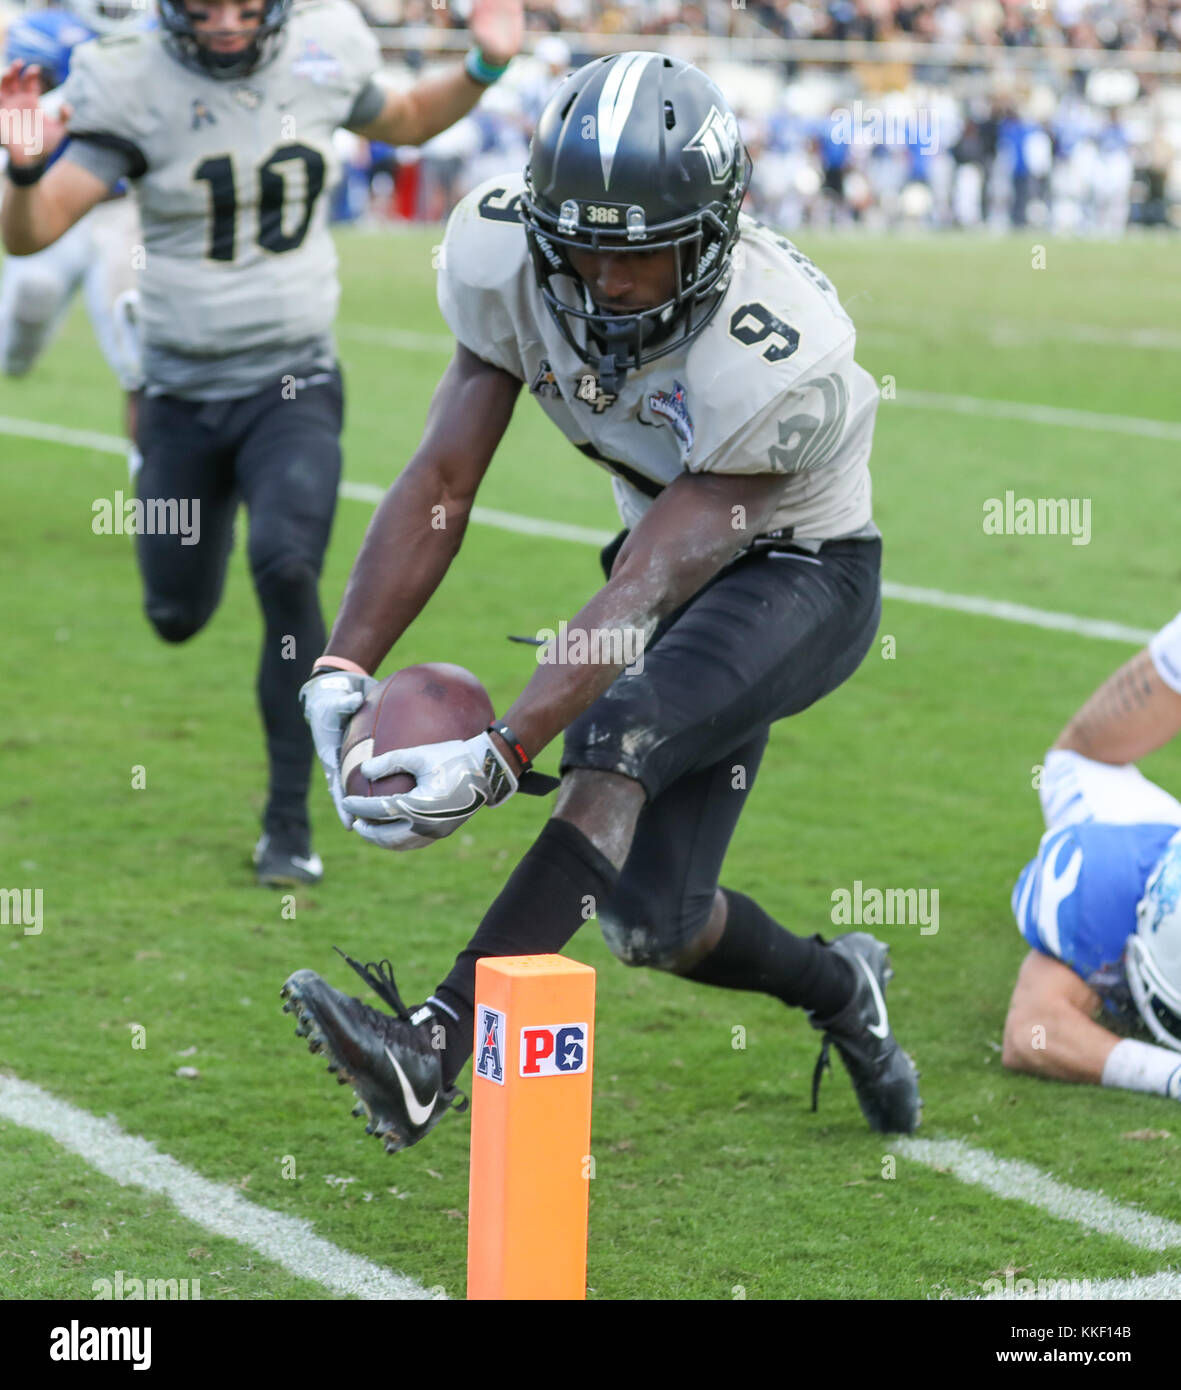 Orlando, FL, USA. 2nd Dec, 2017. UCF's Adrian Killins Jr. #9 crosses the goal line to score a touchdown during the AAC Championship football game between the UCF Knights and the Memphis Tigers at the Spectrum Stadium in Orlando, FL. Kyle Okita/CSM/Alamy Live News Stock Photo